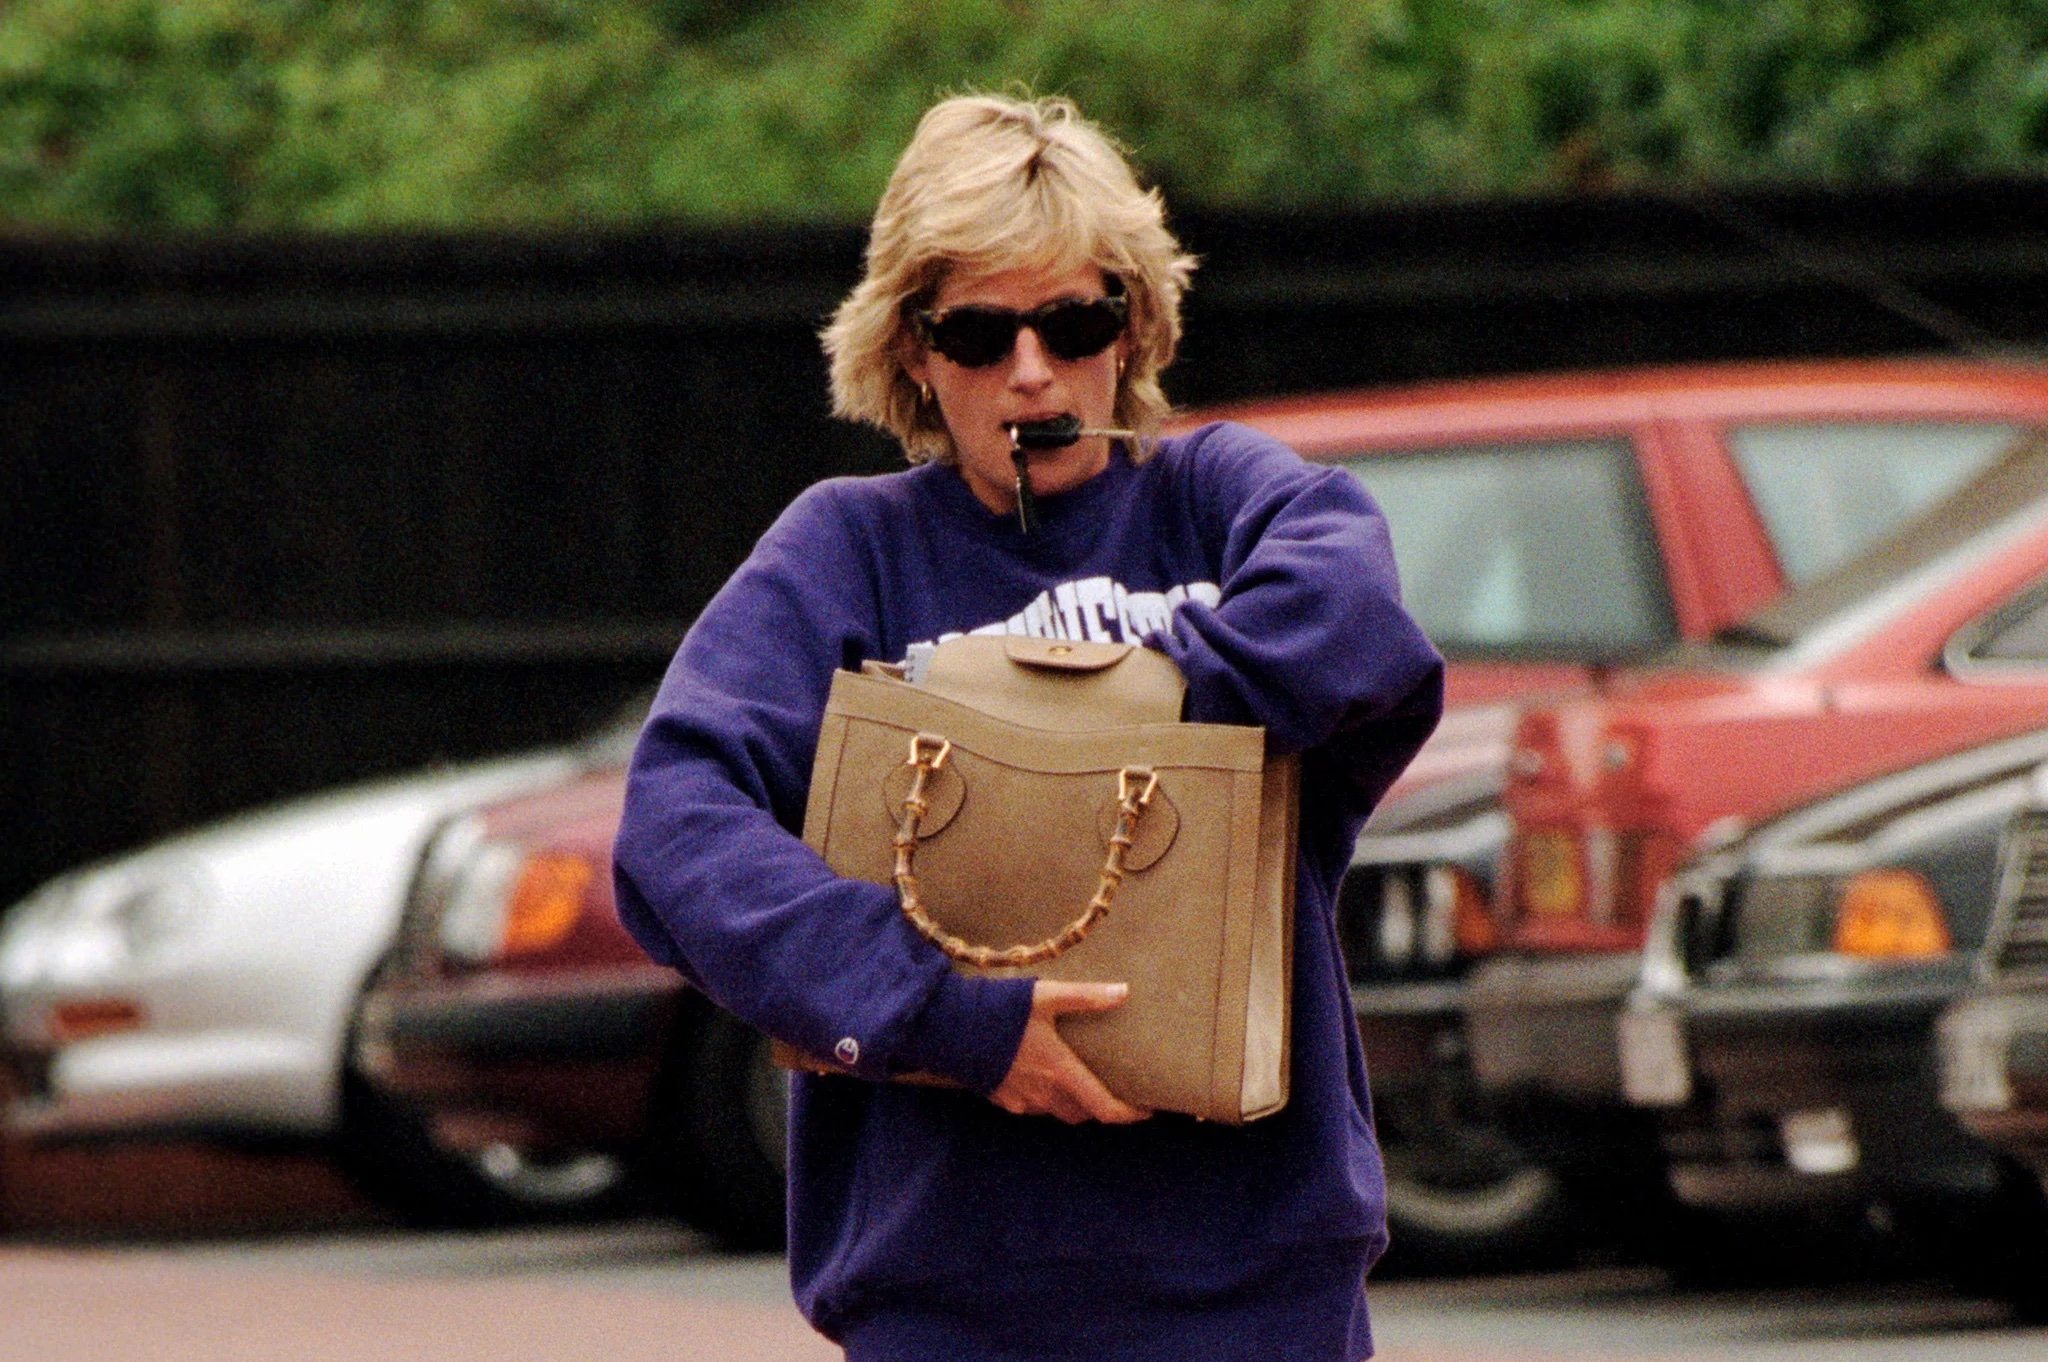 10 People Who Inspired Some of Today's Most Iconic Handbags